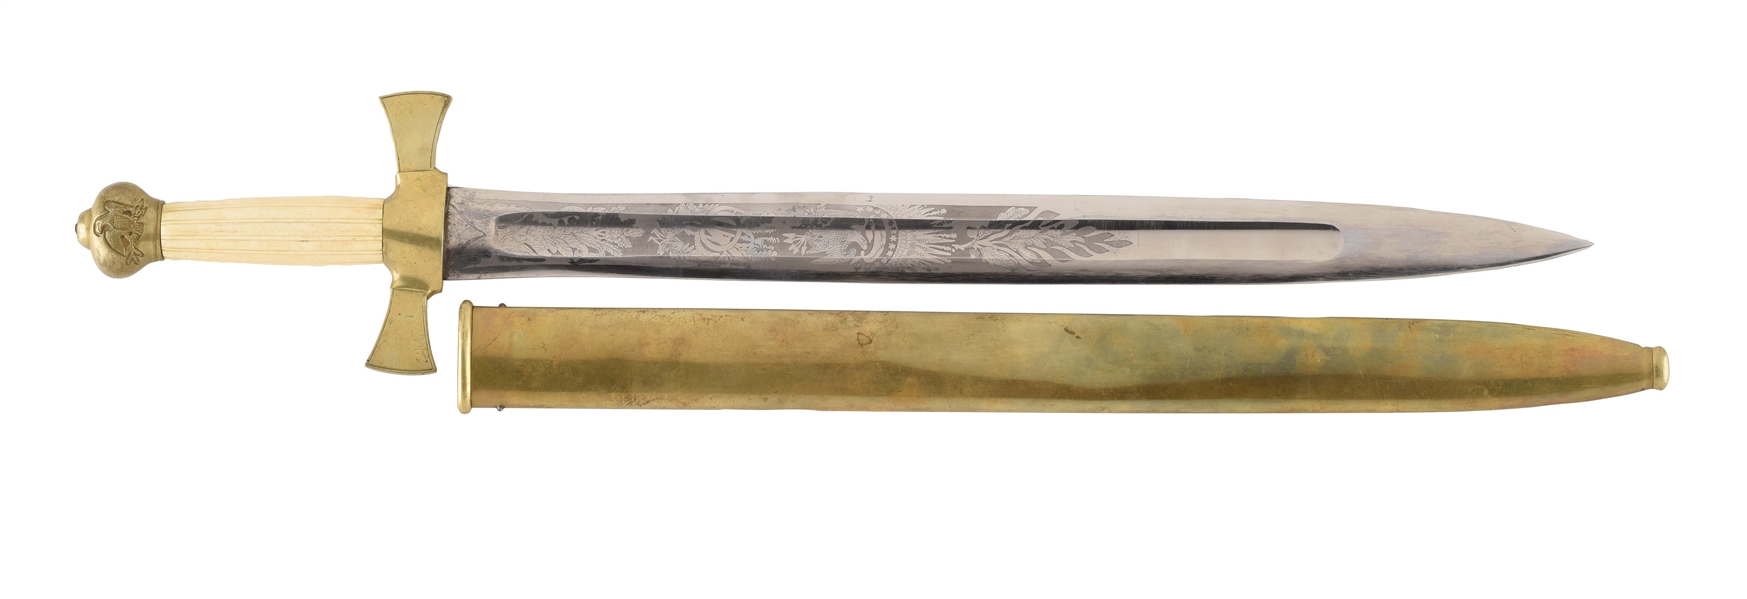 EXTRAORDINARILY RARE & FINE AMES MODEL 1832 FOOT ARTILLERY OFFICERS SWORD WITH SCABBARD. 